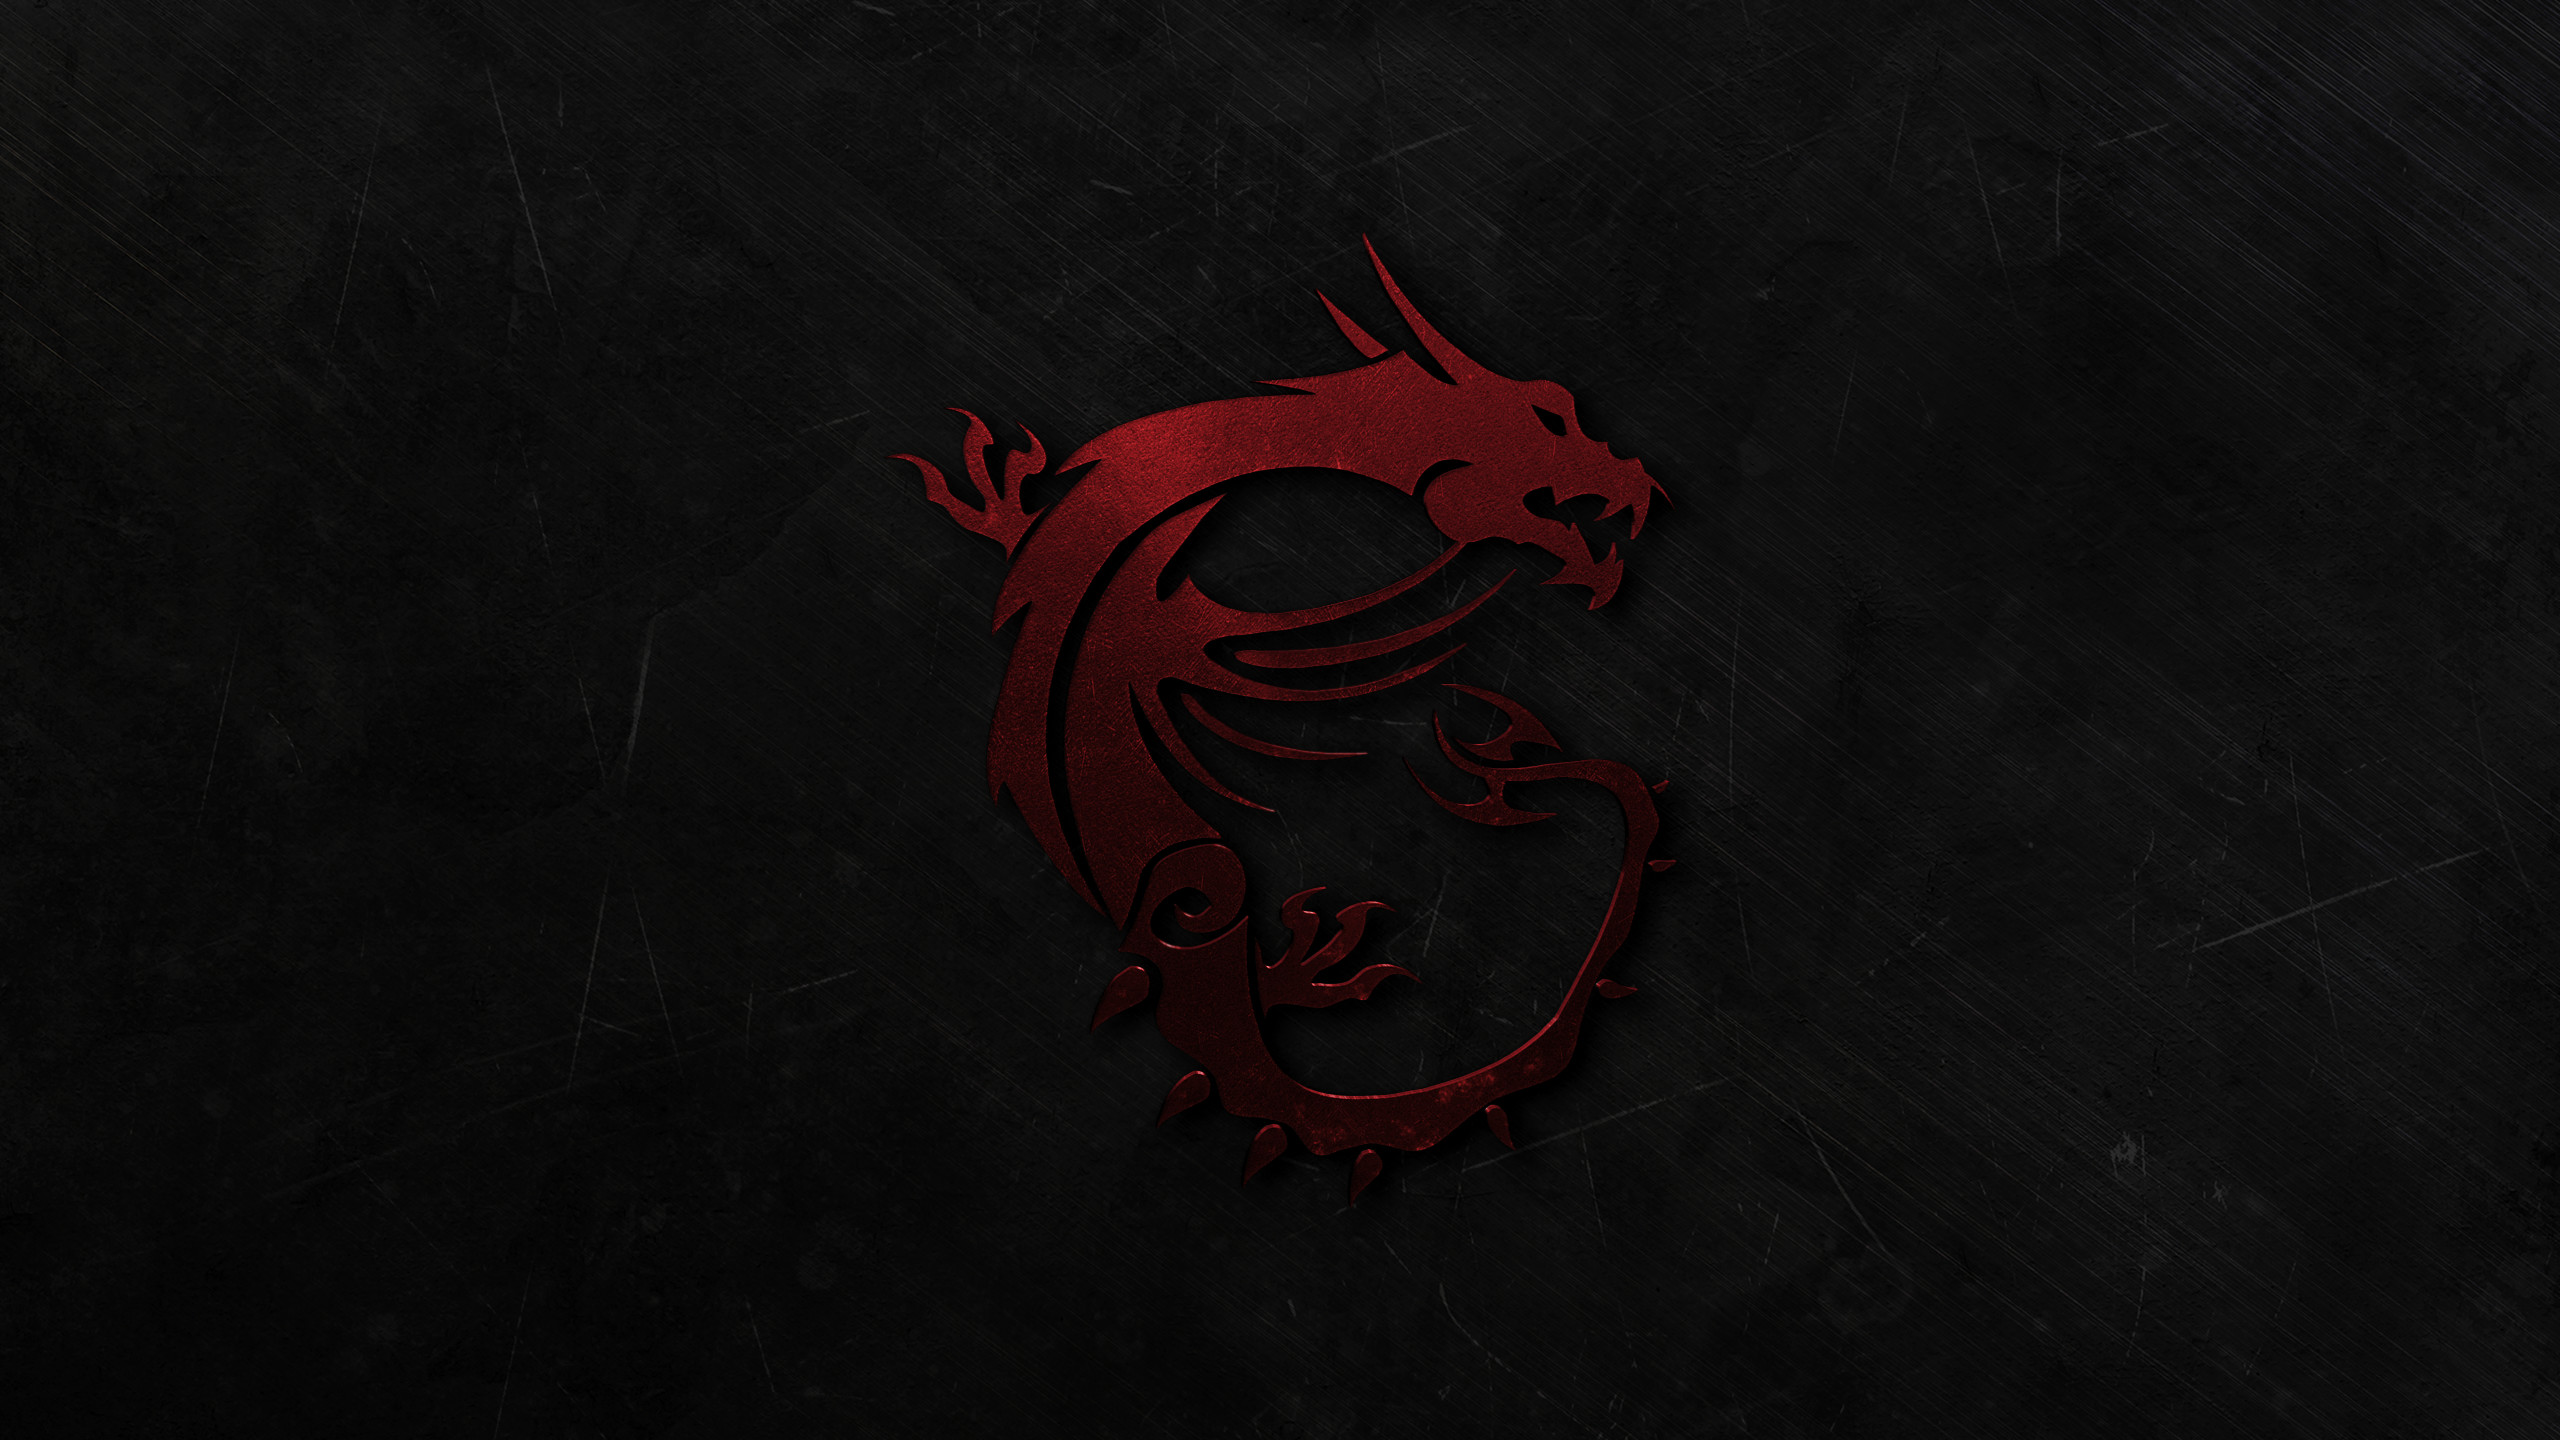 Wallpapers dragon red symbol on the desktop